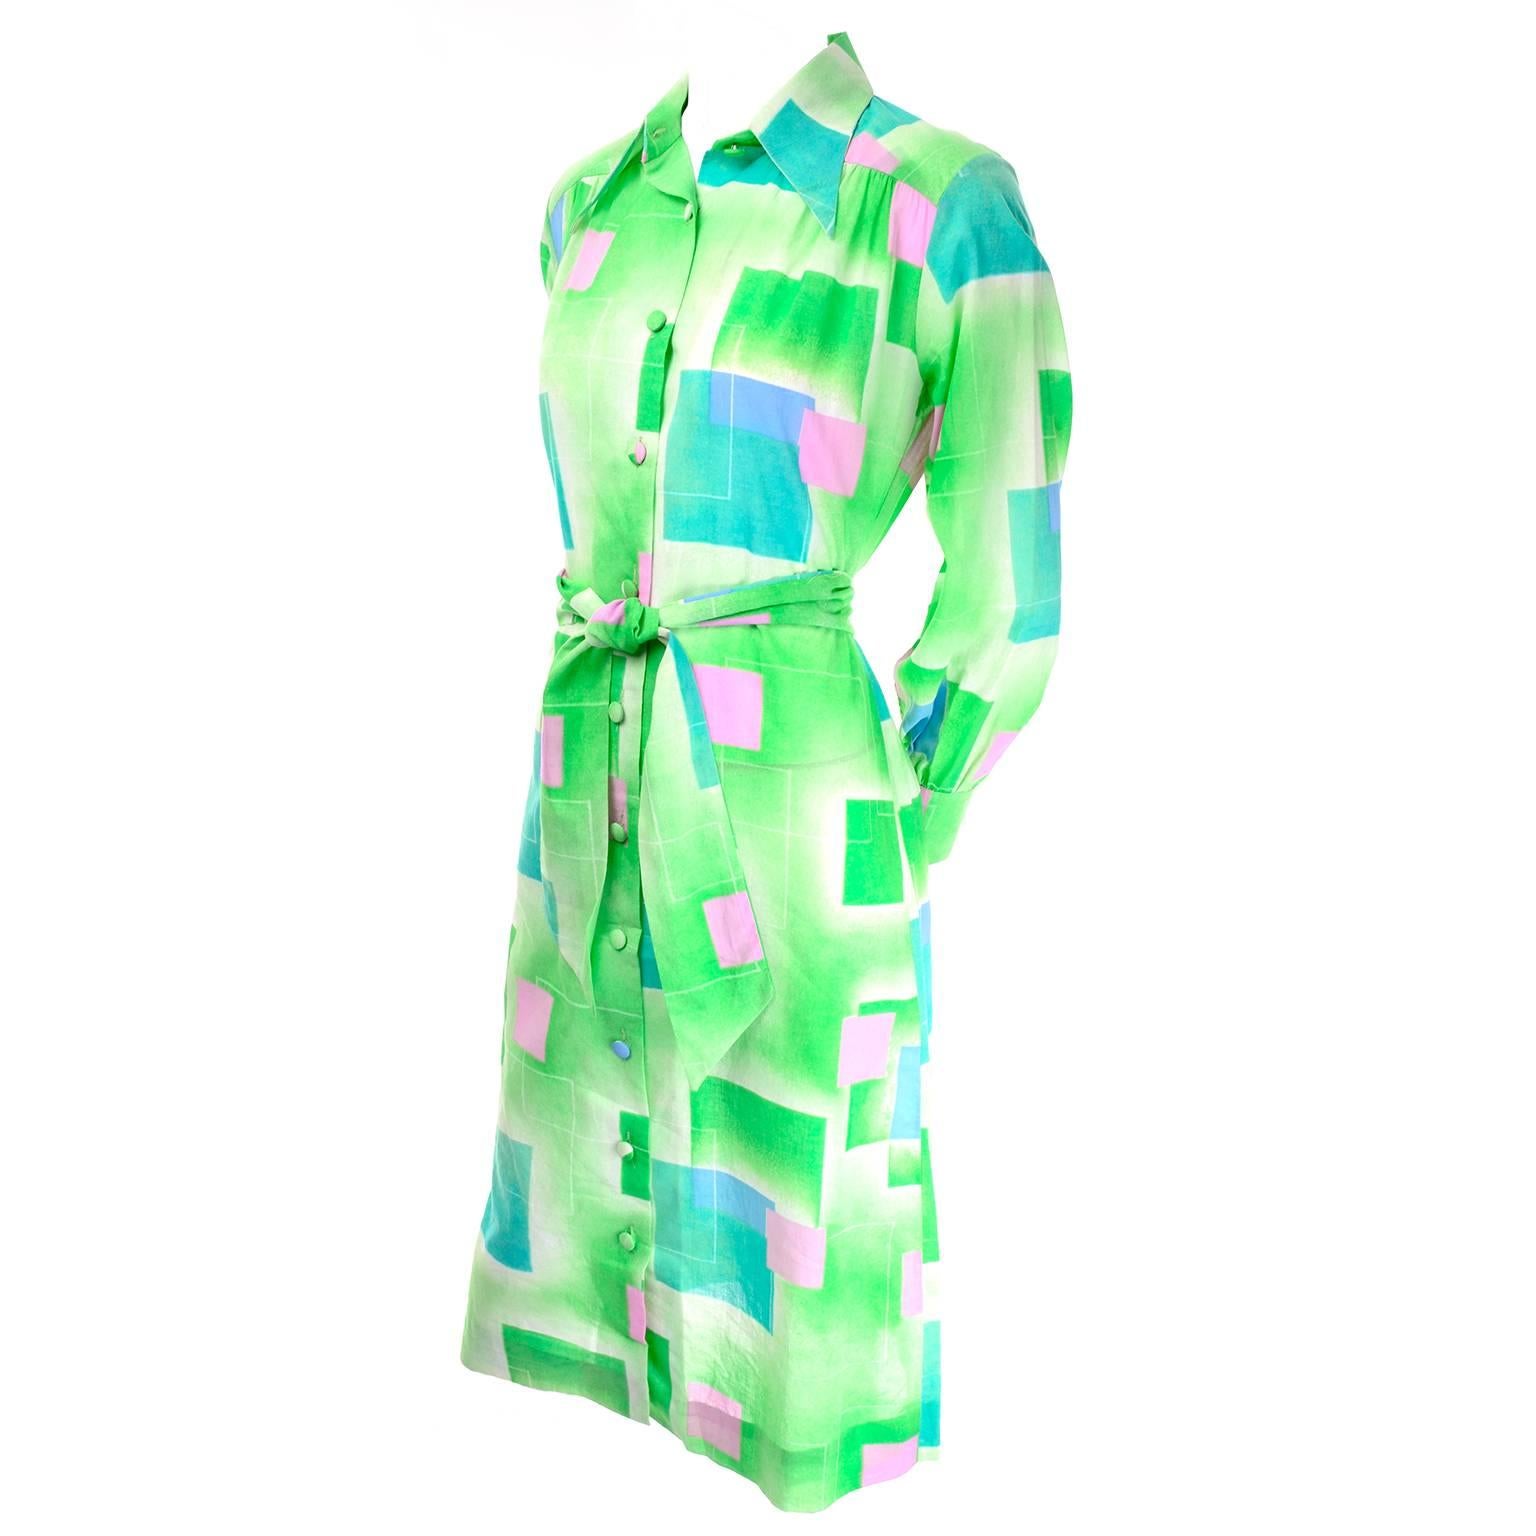 Women's 1970s Lanvin Vintage Dress in Geometric Graphic Green Blue and Pink Print 8/10